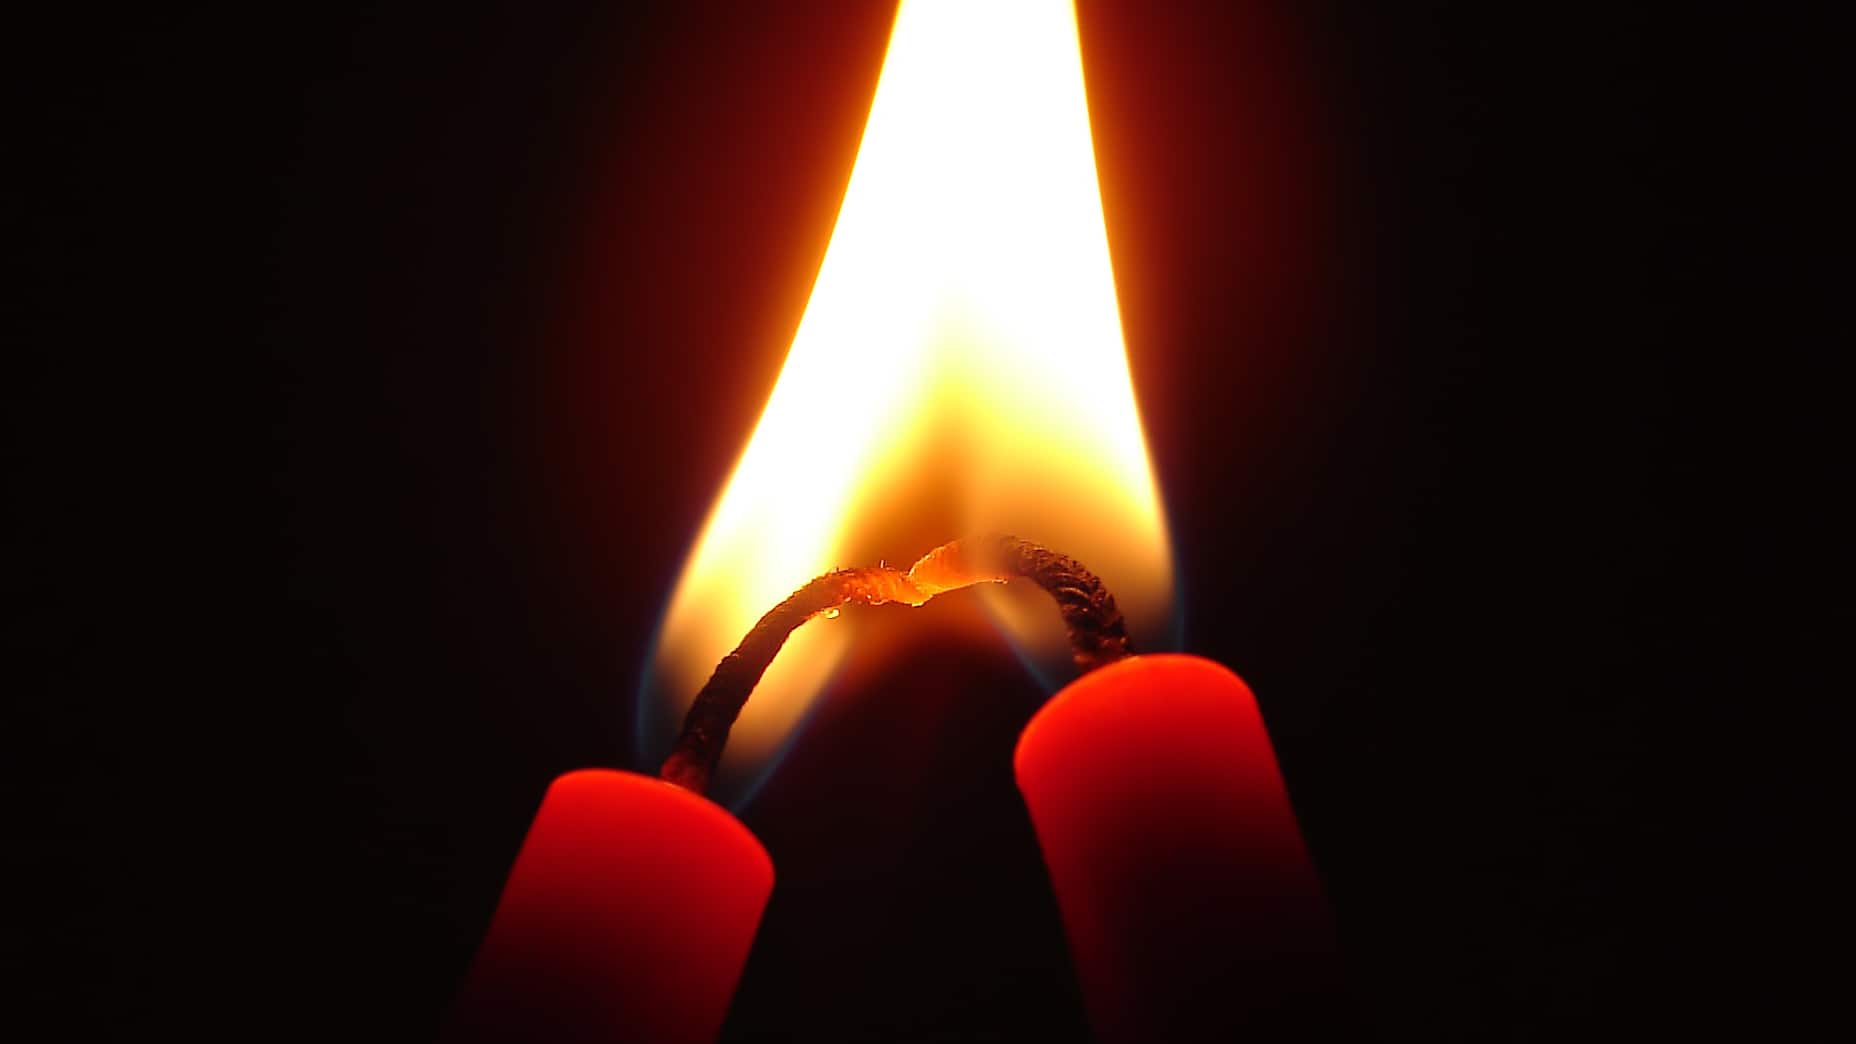 Candle flames meet in the dark. Photo by Nevit Dilmen